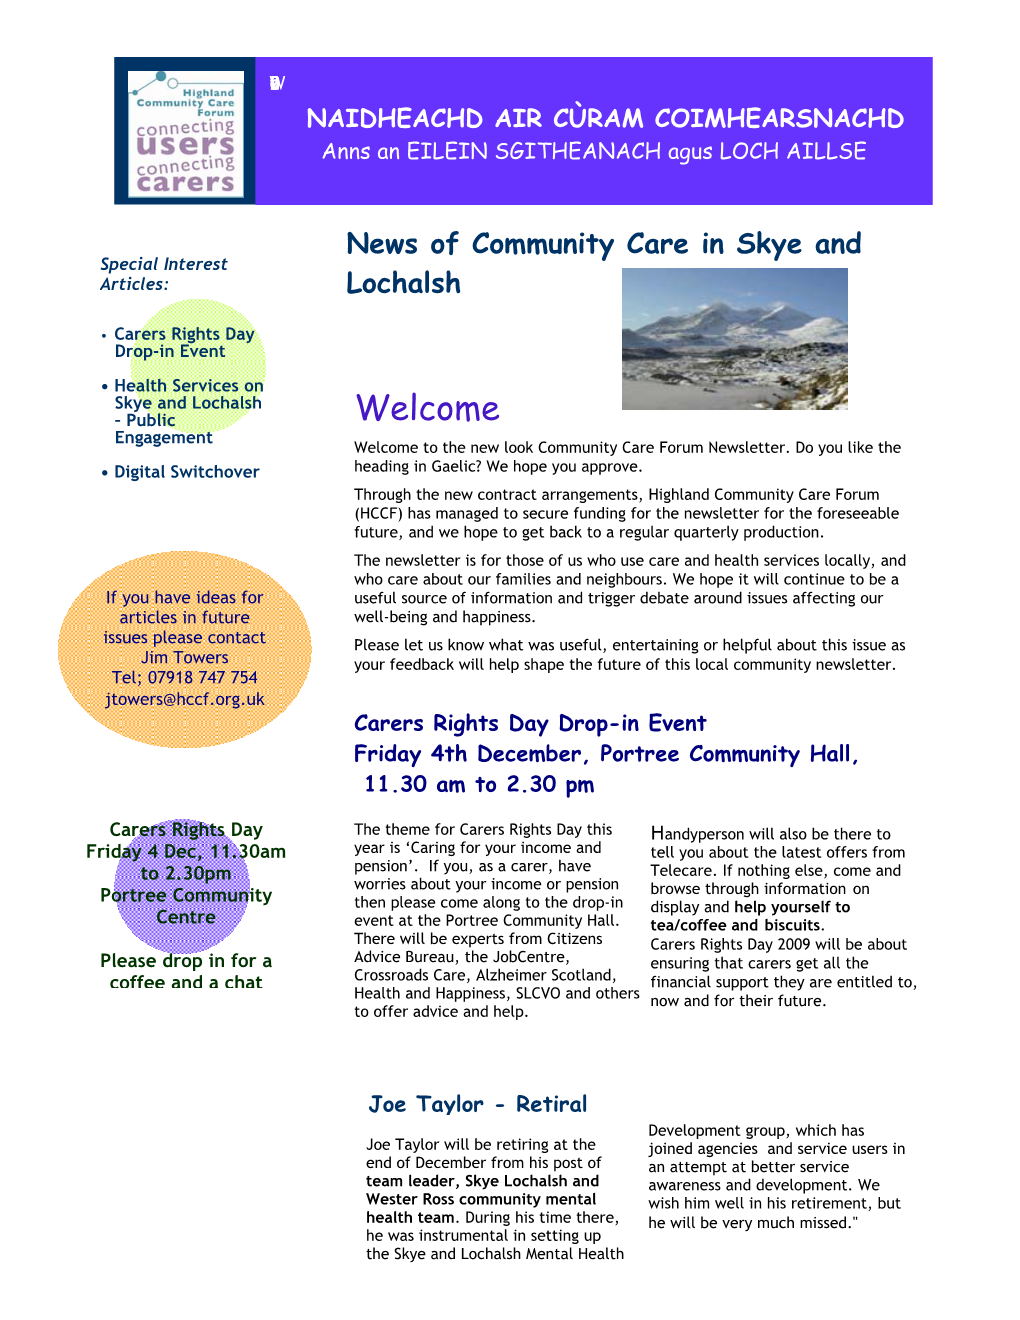 News of Community Care in Skye and Lochalsh